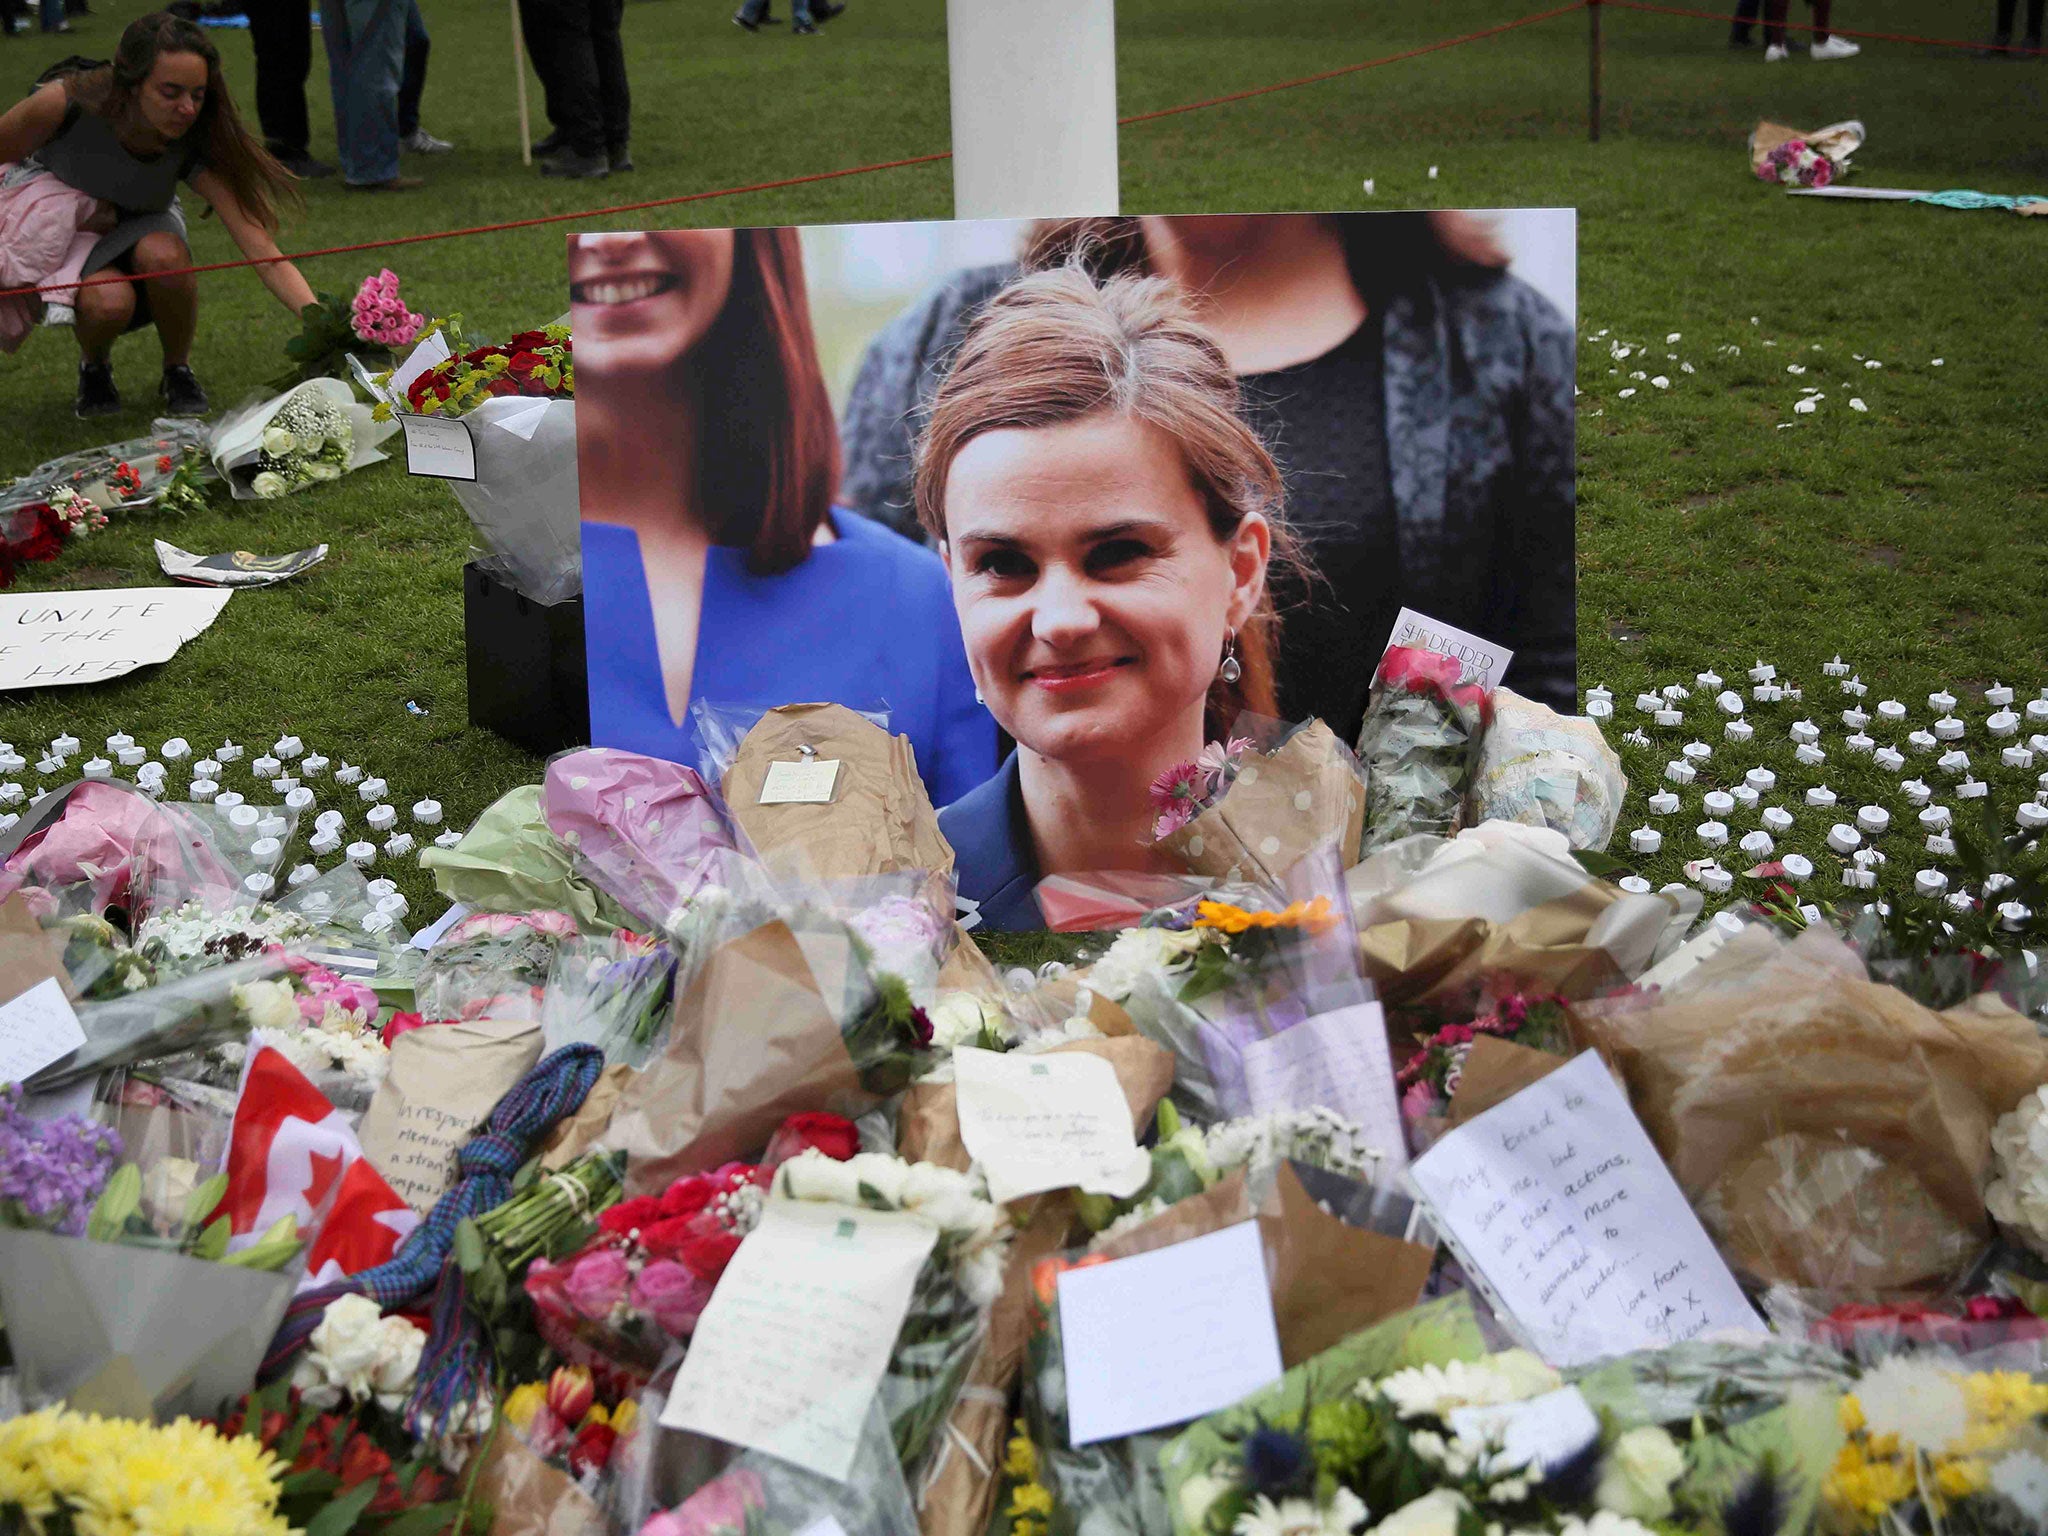 The memorial fund set up after Jo Cox's murder has now reached more than £1 million